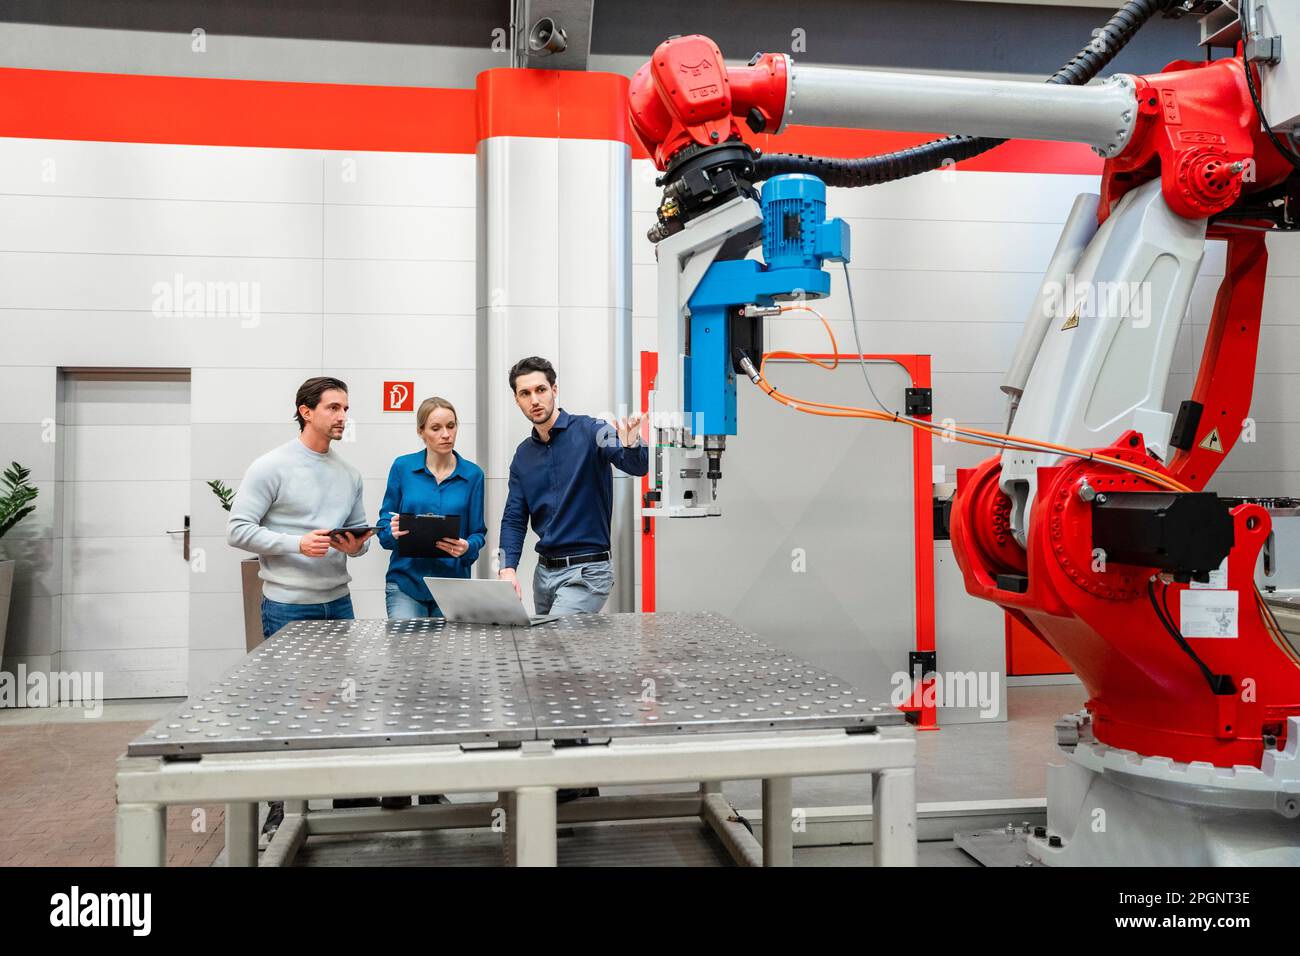 Colleagues examining robots in factory Stock Photo